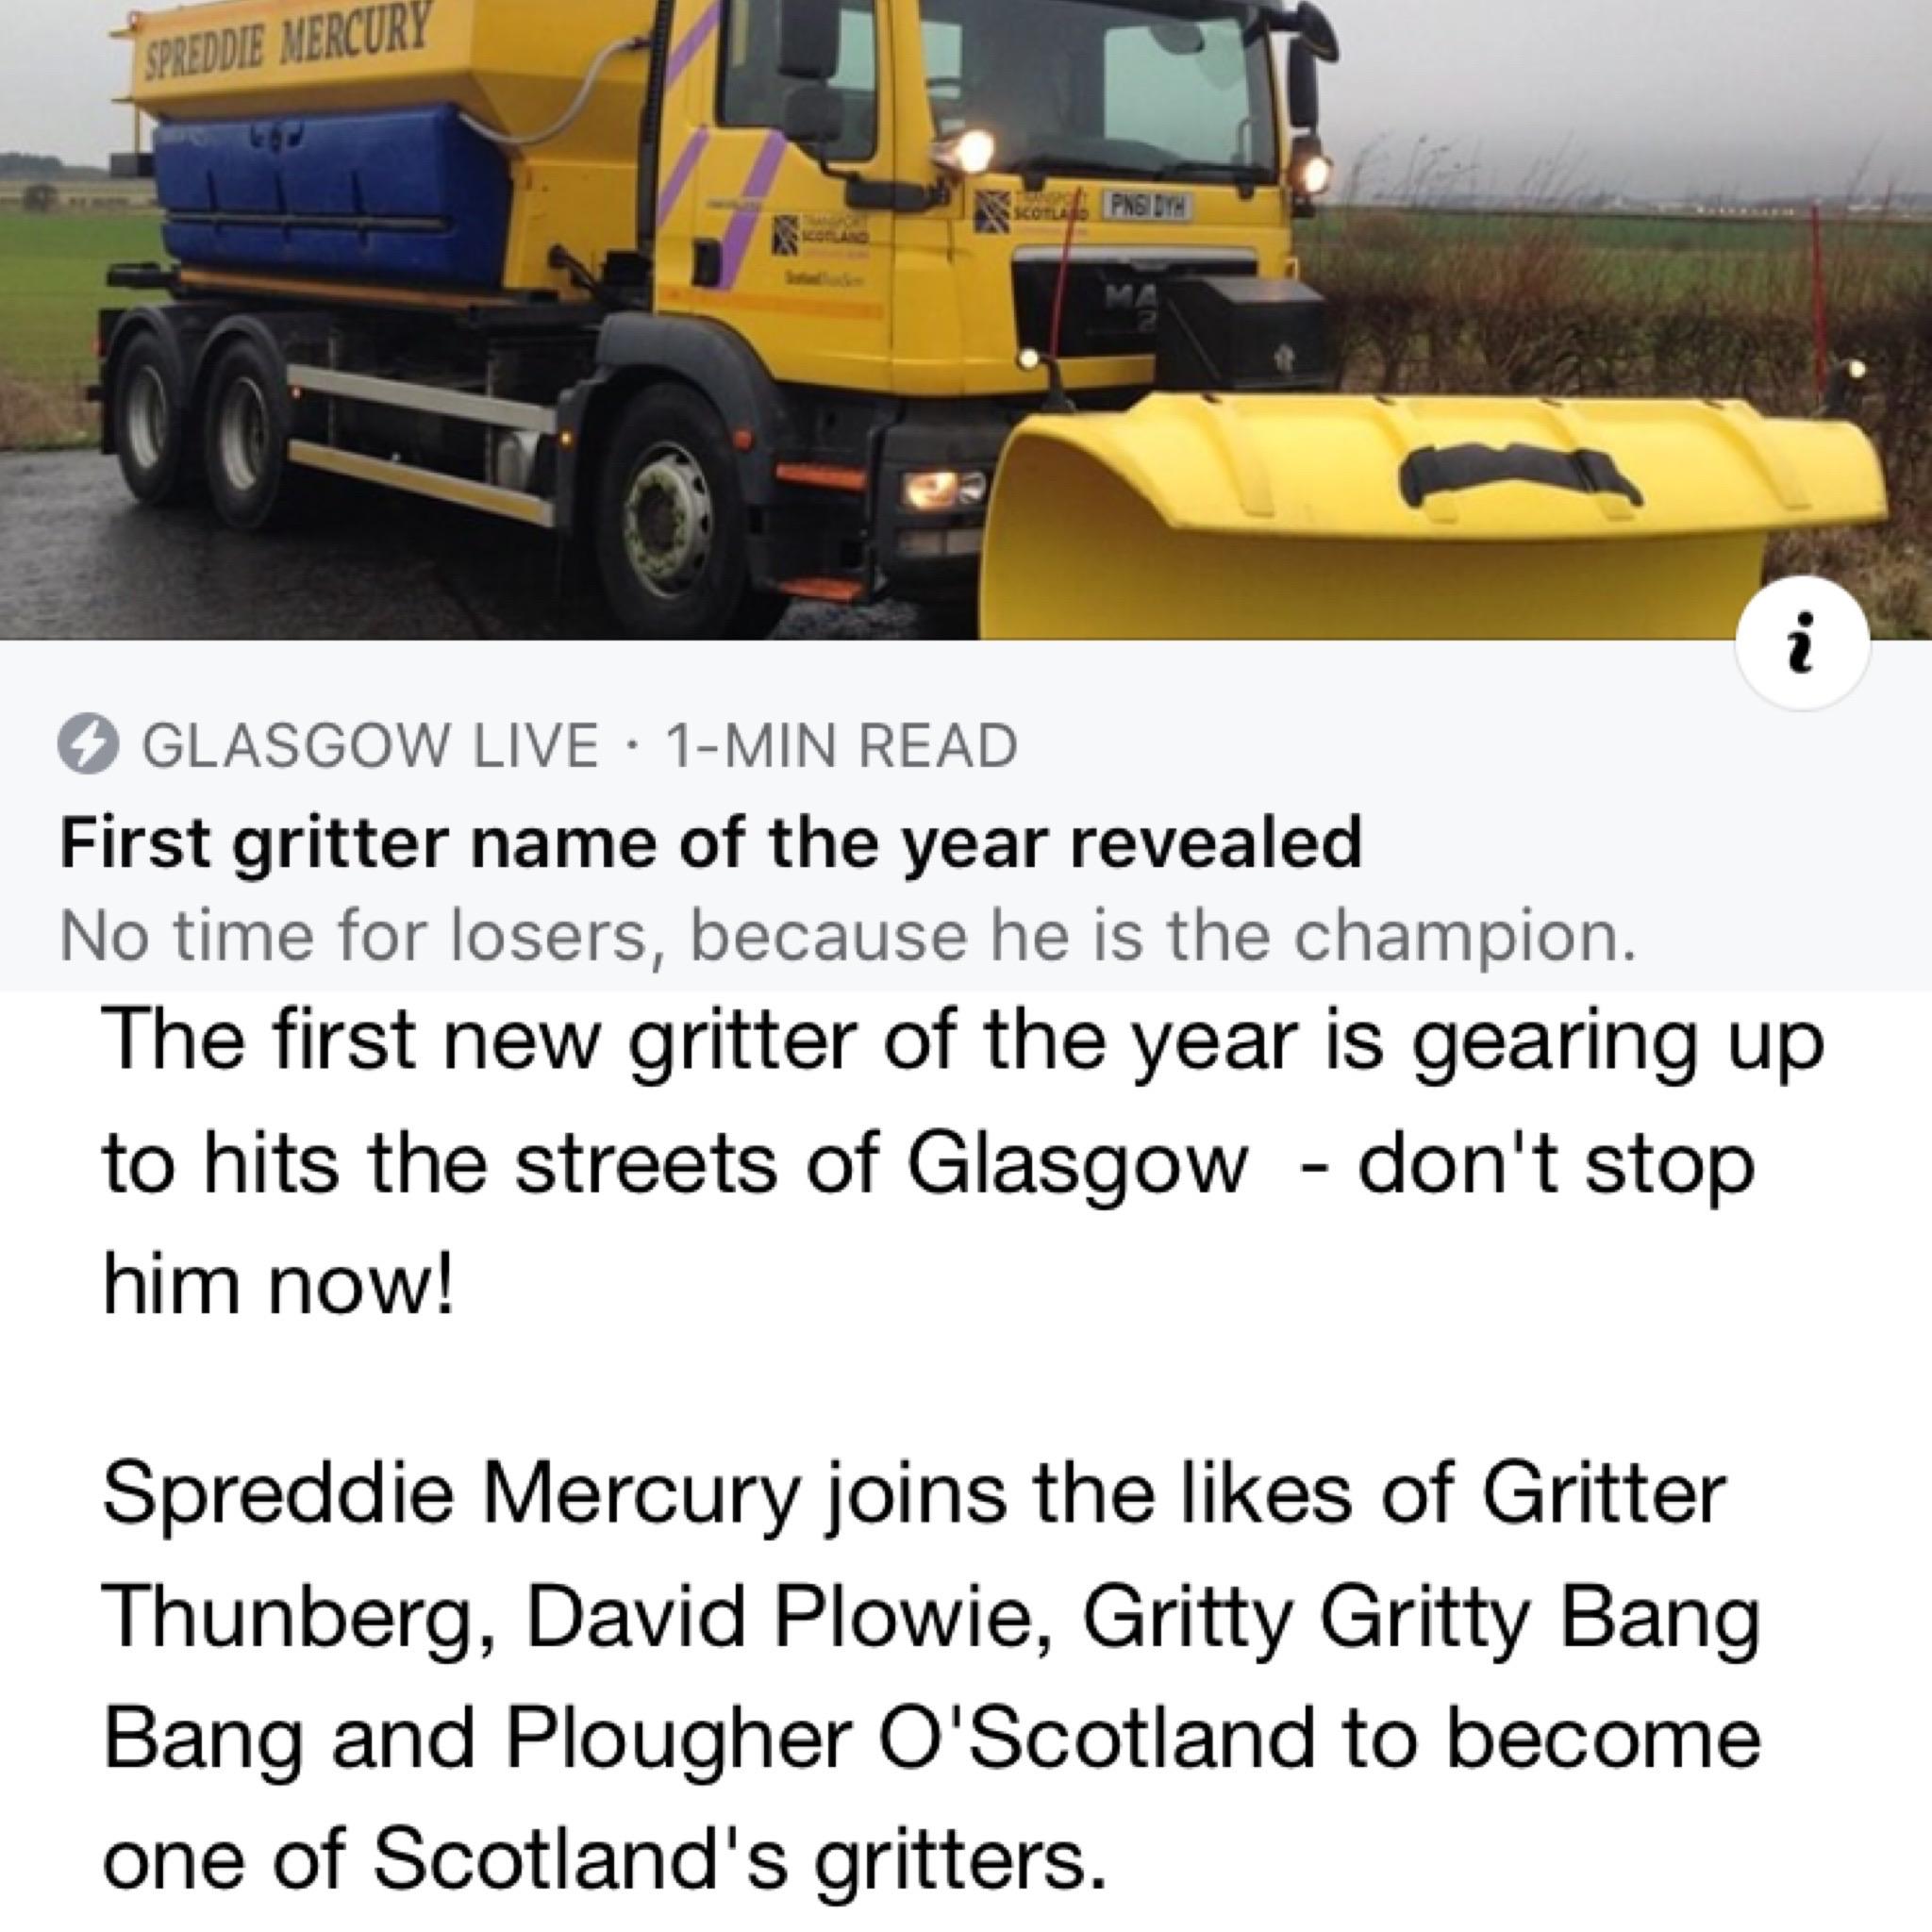 The gritters of Scotland